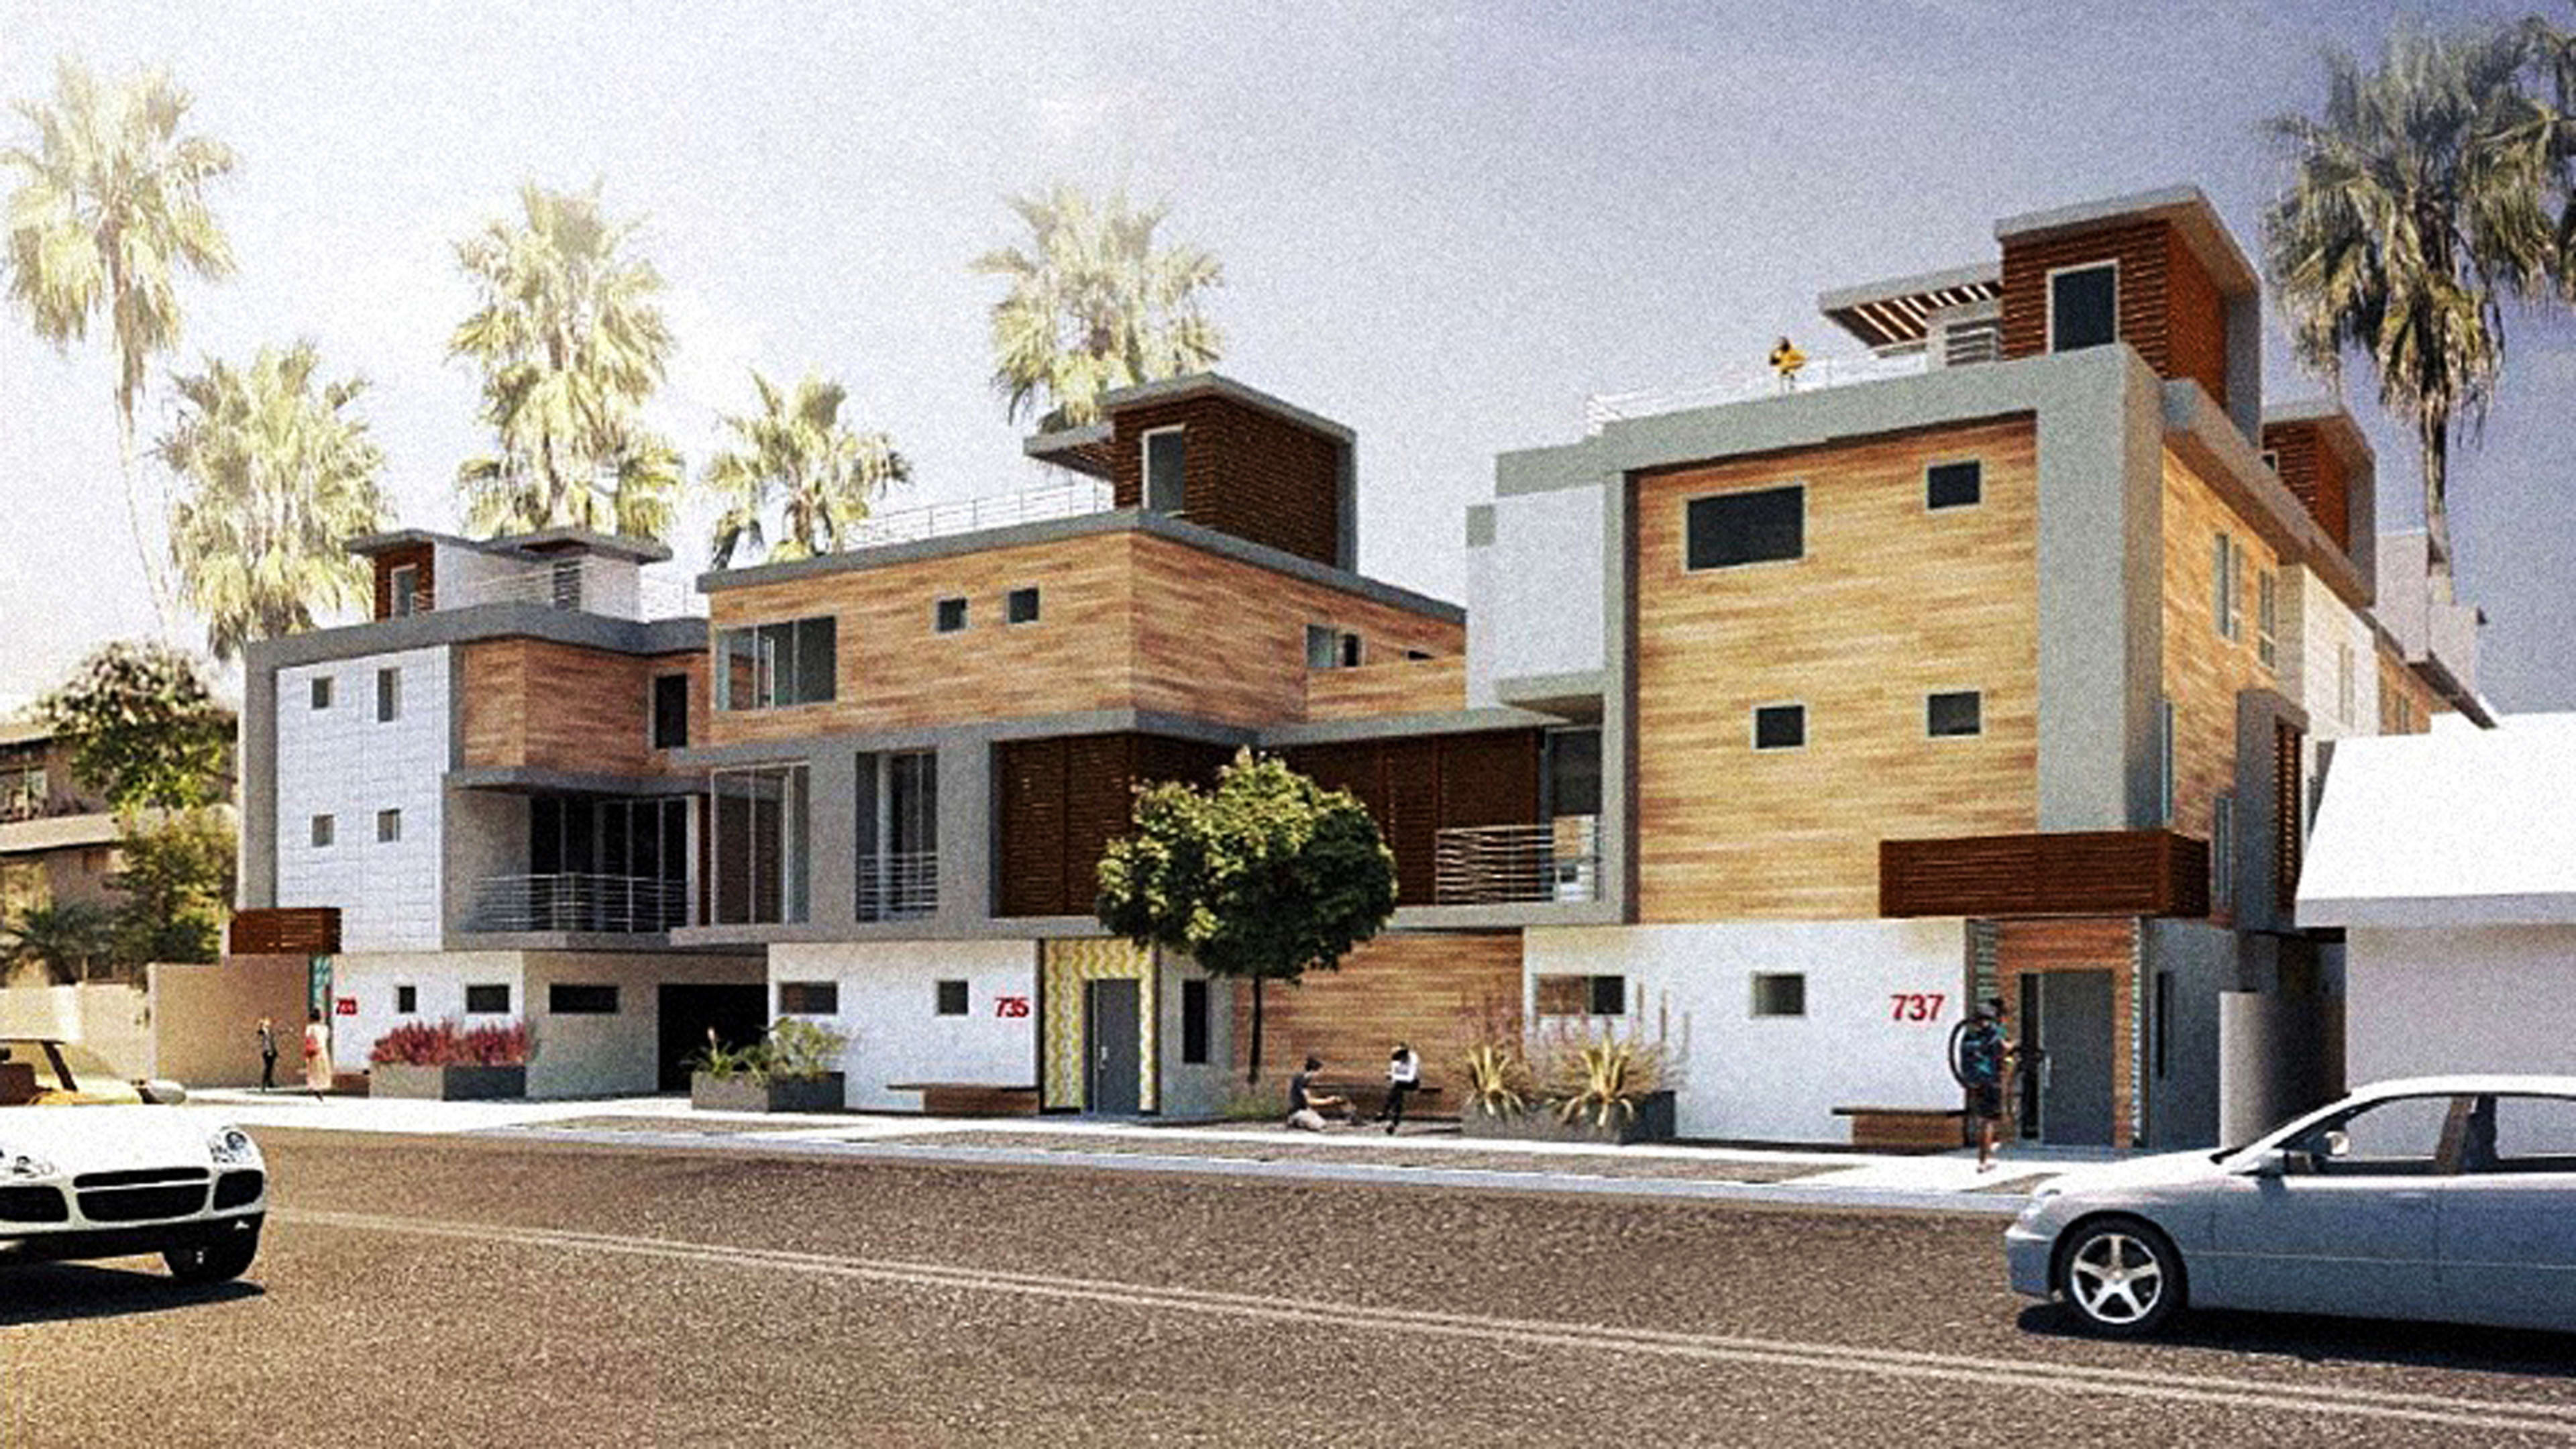 Can This Crowdfunding Platform Help Build The Kind Of Houses Millennials Want To Buy?